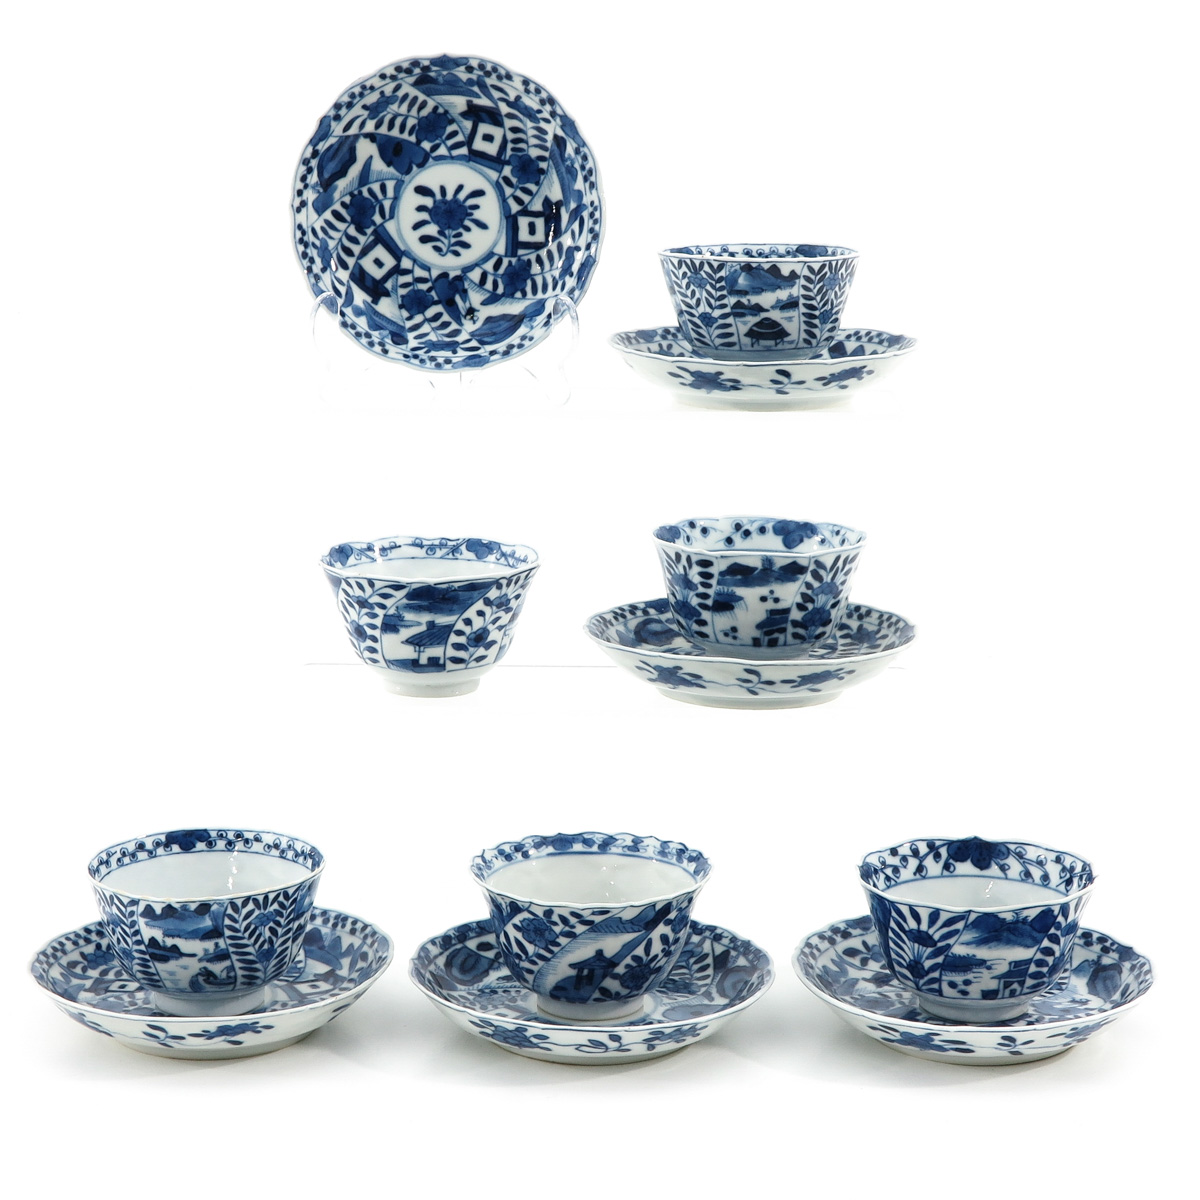 A Set of 6 Cups and Saucers